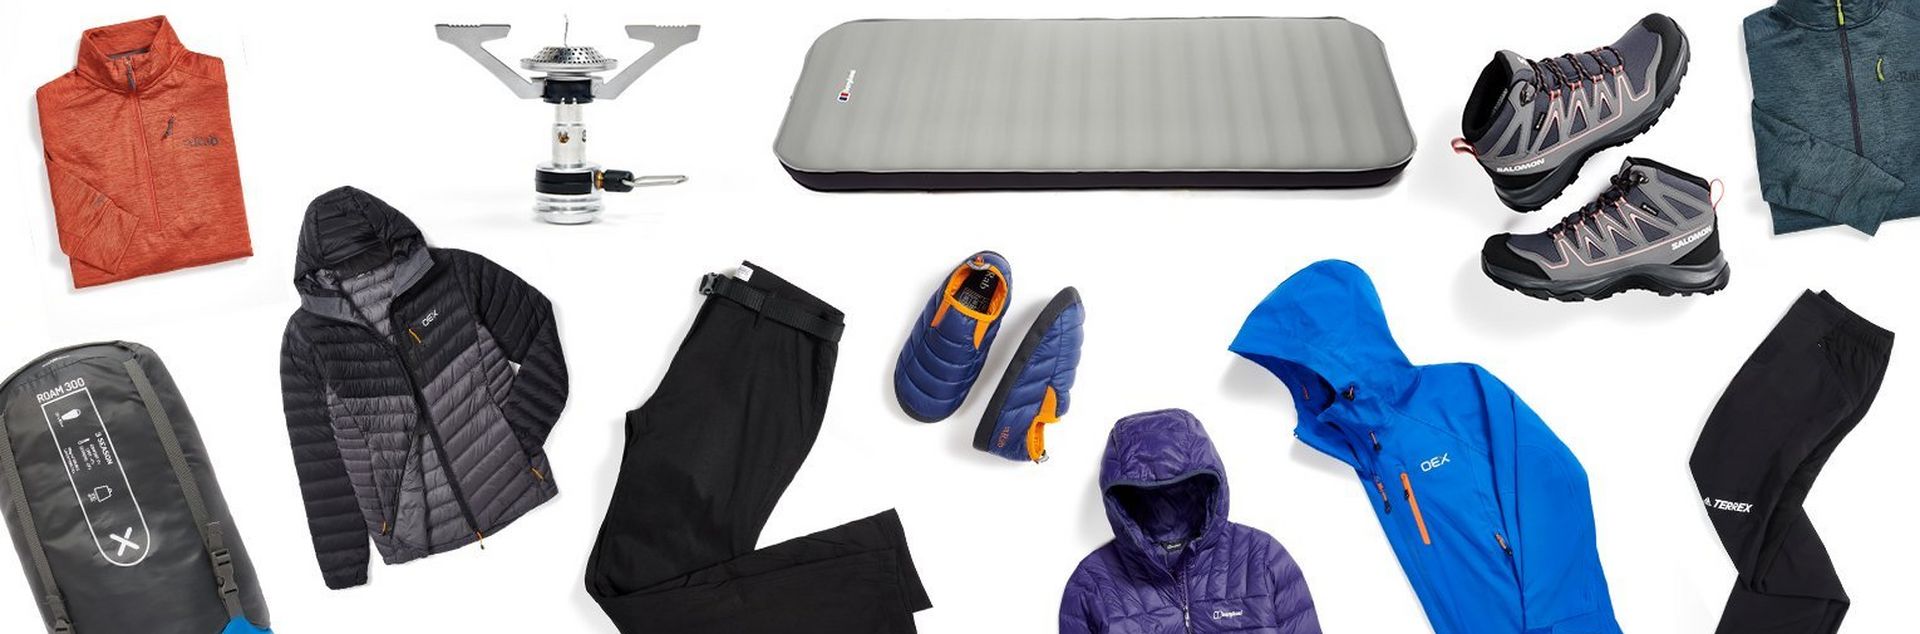 A flatlay image of outdoor products including men's clothing, women's clothing and tents and camping equipment